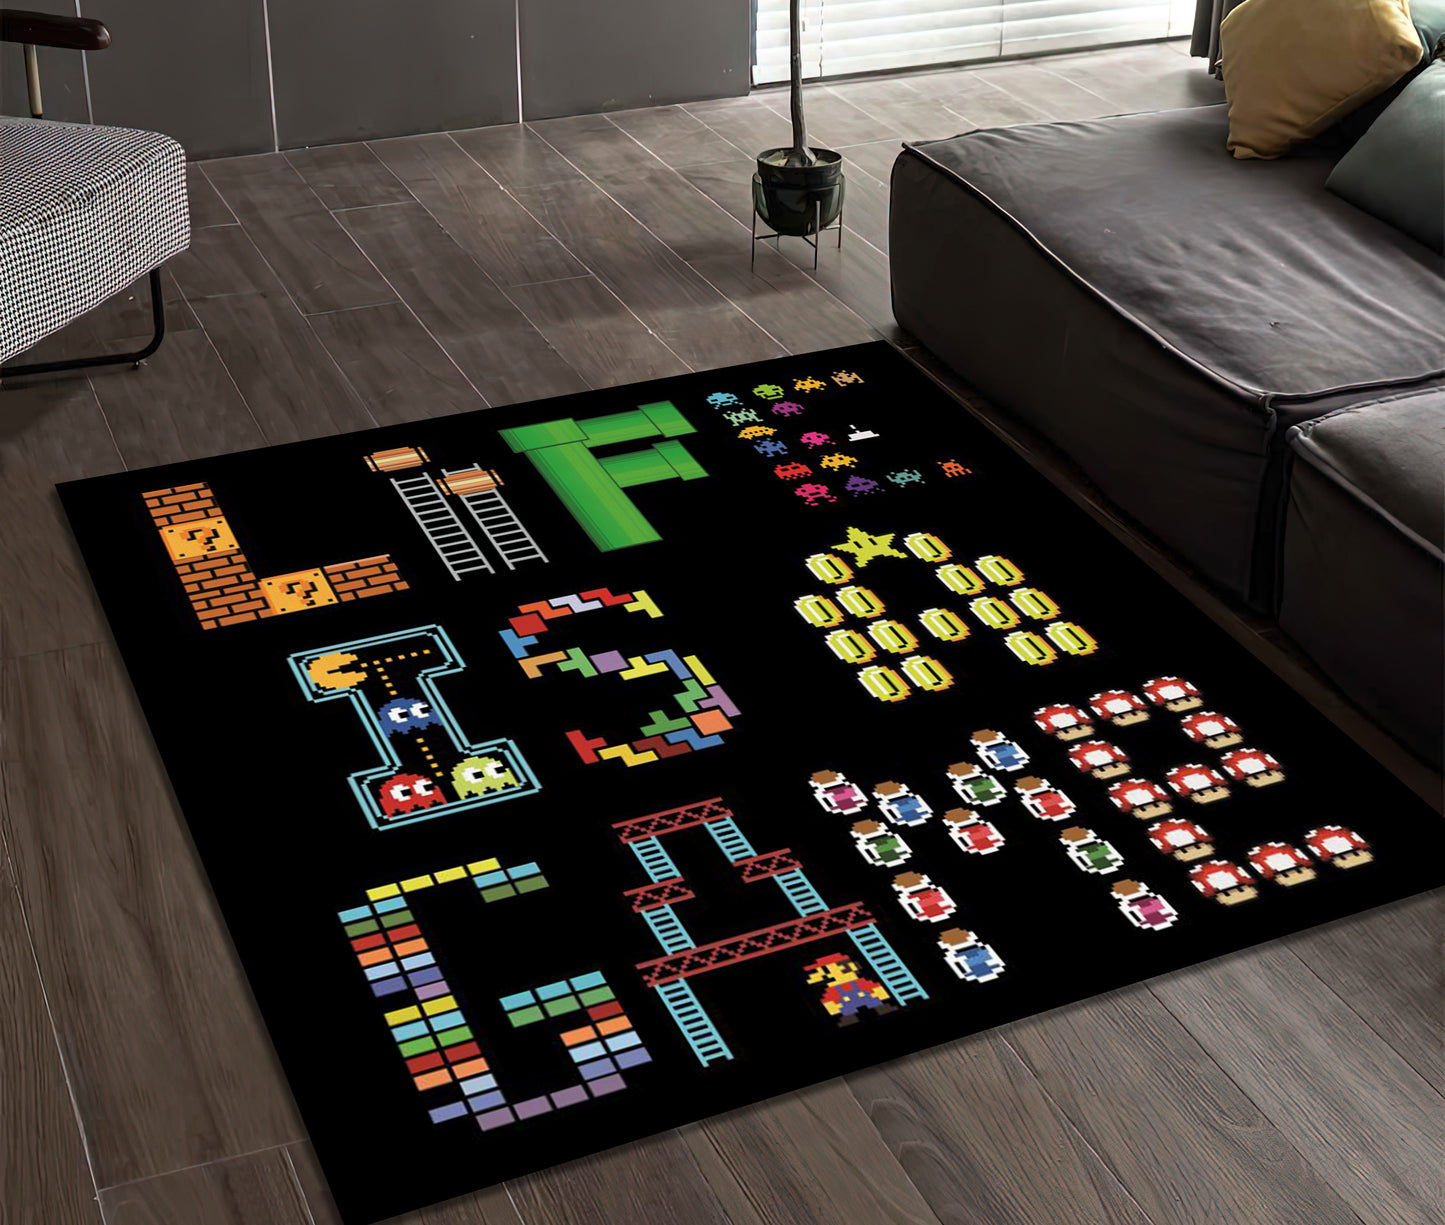 Video Game Rug, Game Room Decor, Life is a Game Mat, Gaming Rug, Gamer Carpet